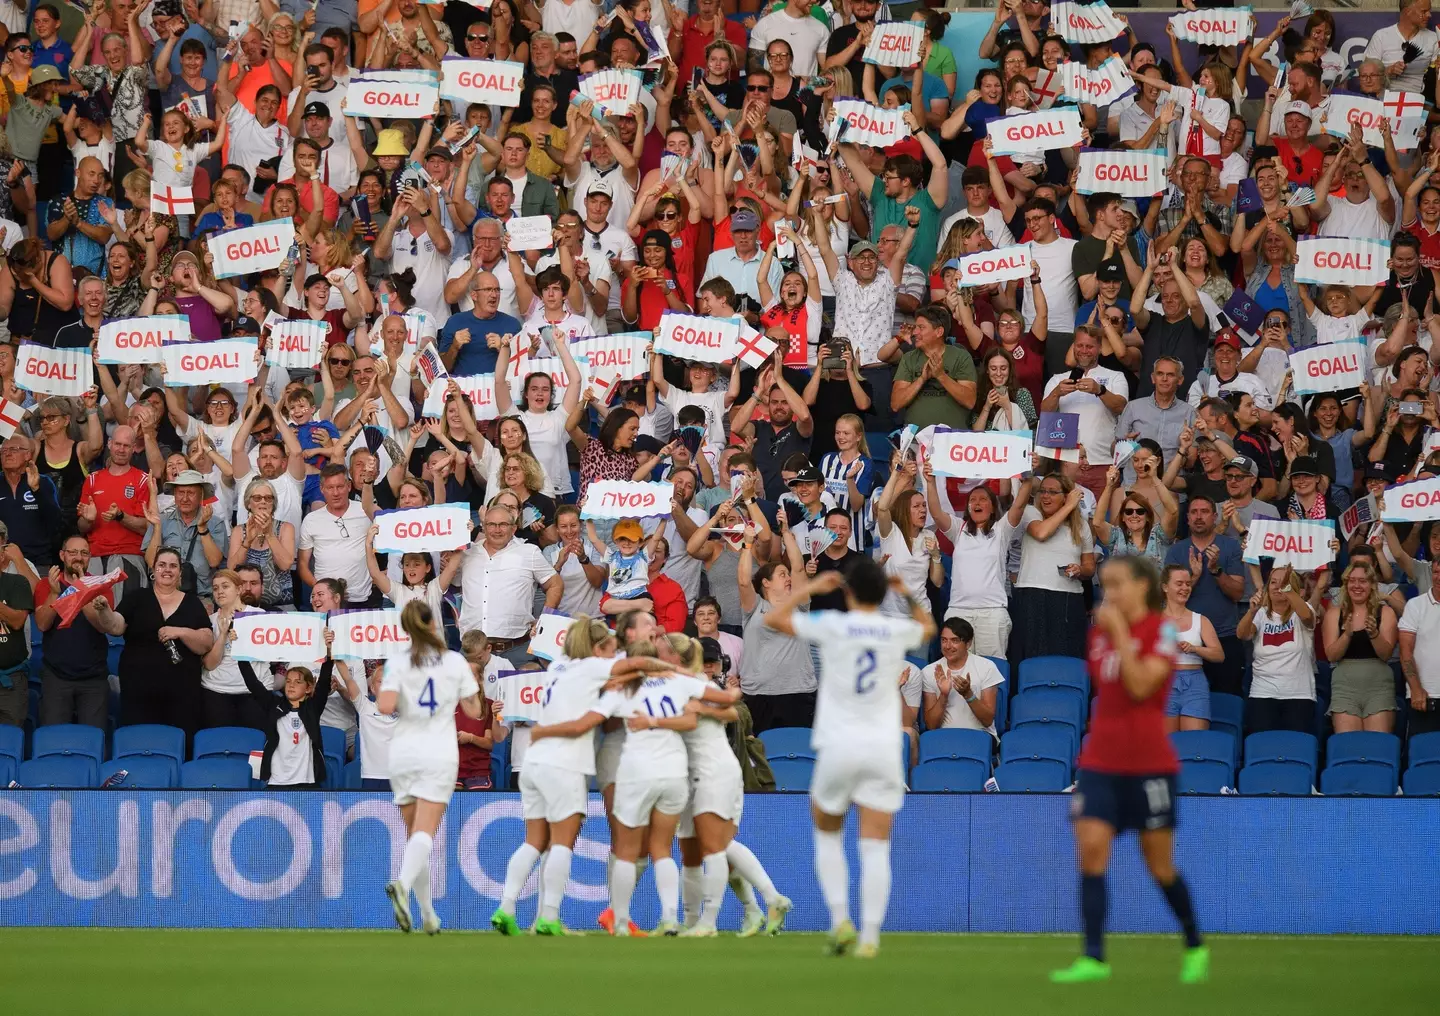 The Lionesses have looked dominant on their way to the final.